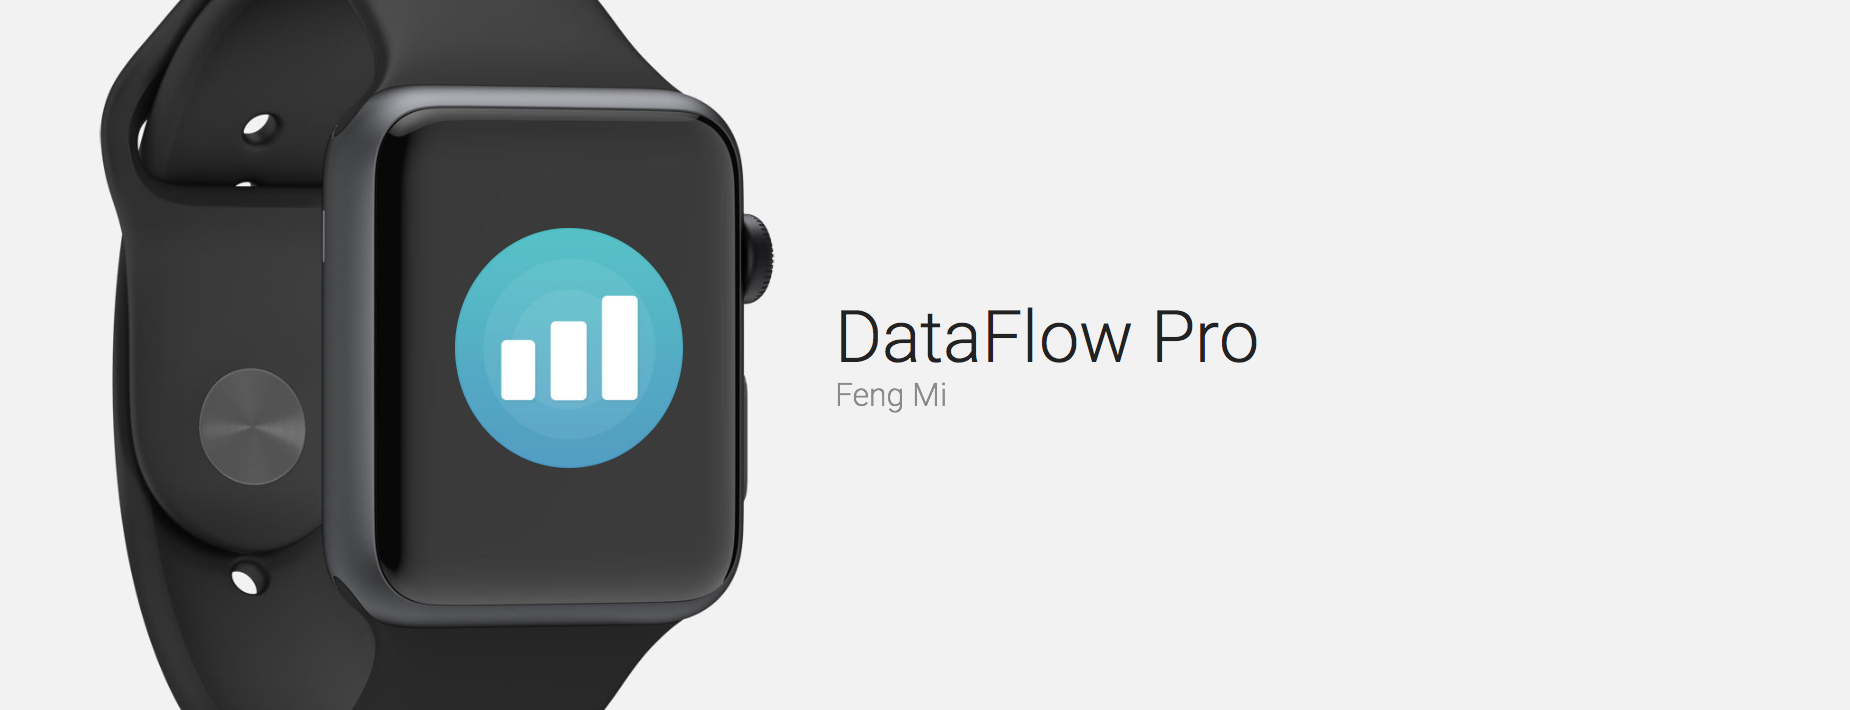 DataFlow Pro Tracks Data Usage and is Free Right Now